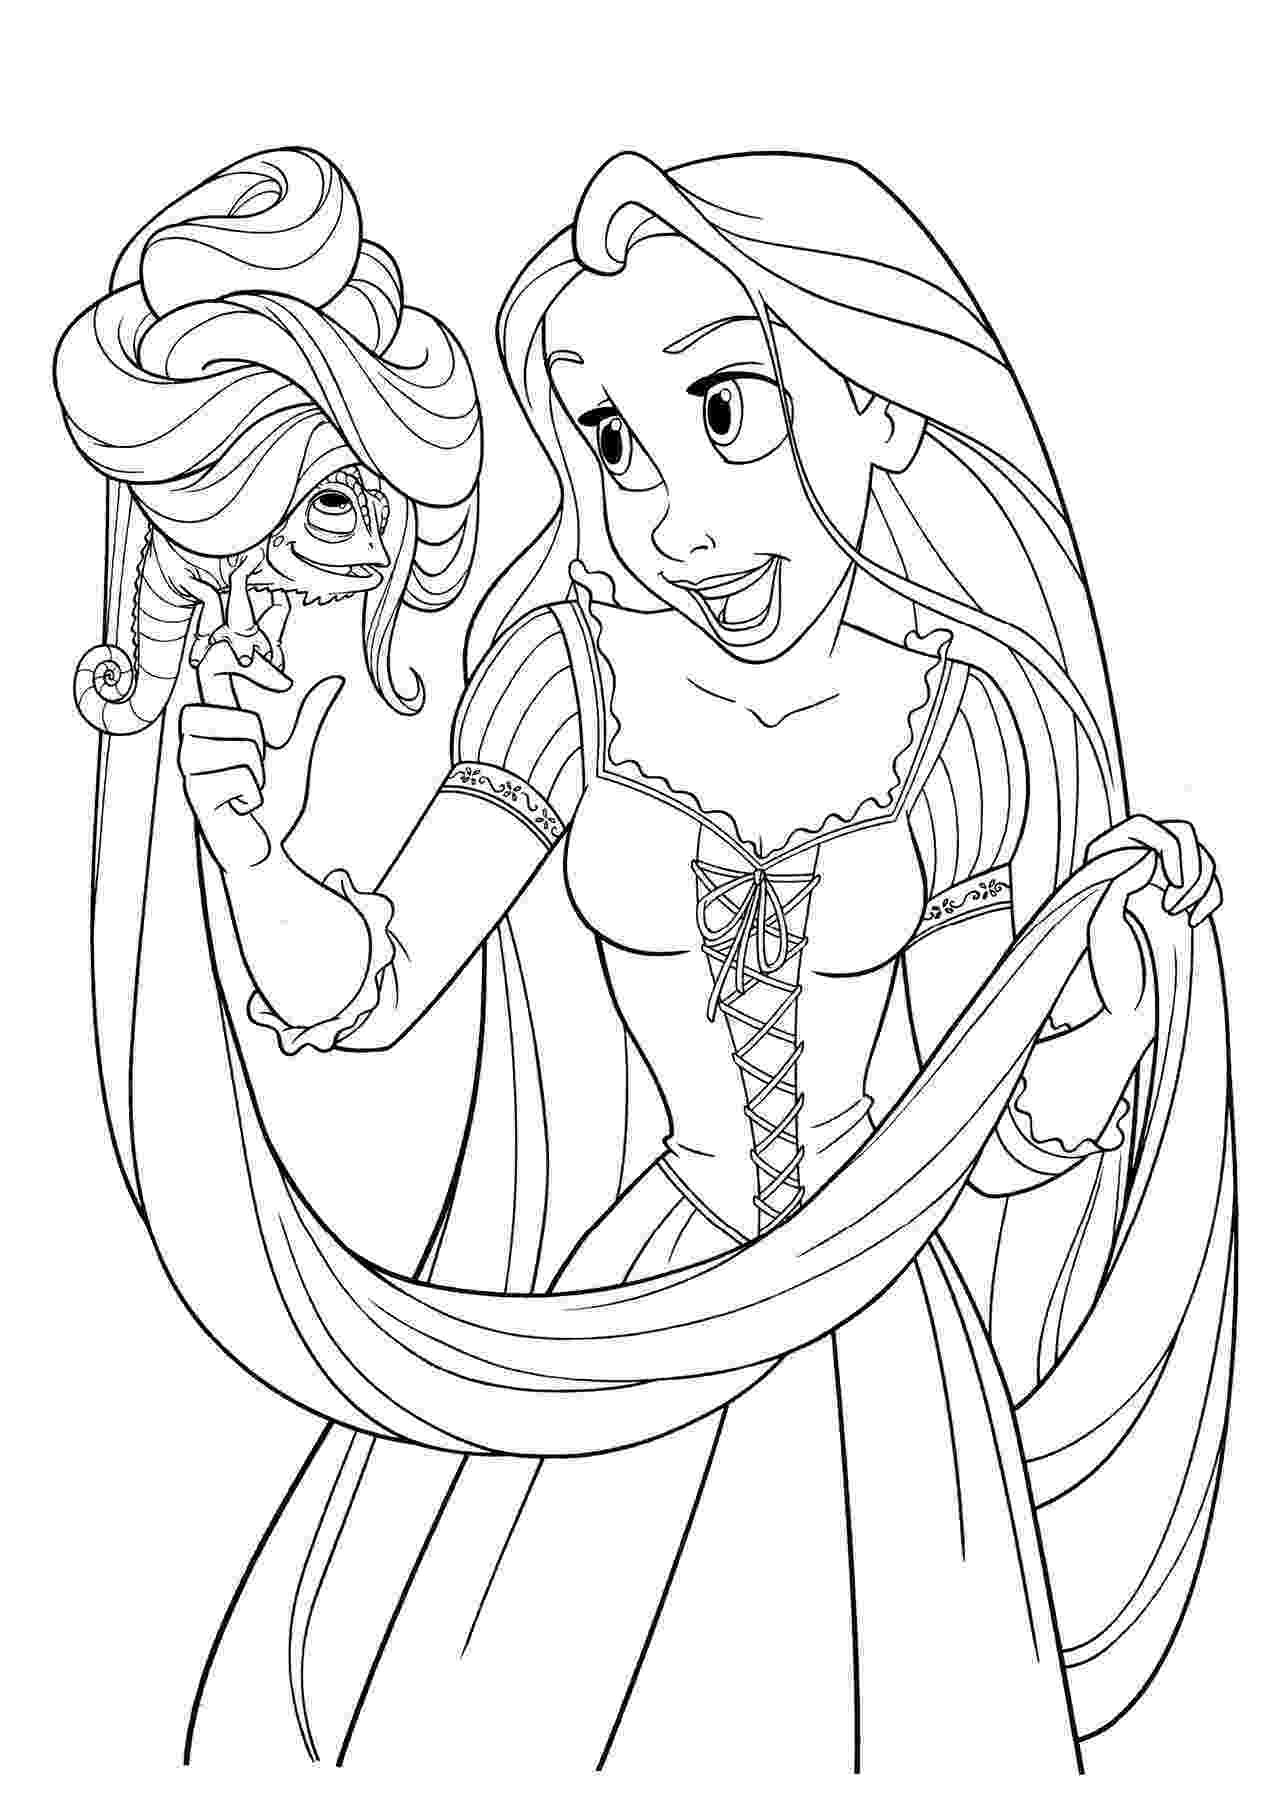 disney coloring book free download free moana coloring pages and downloads from the disney movie coloring free disney book download 